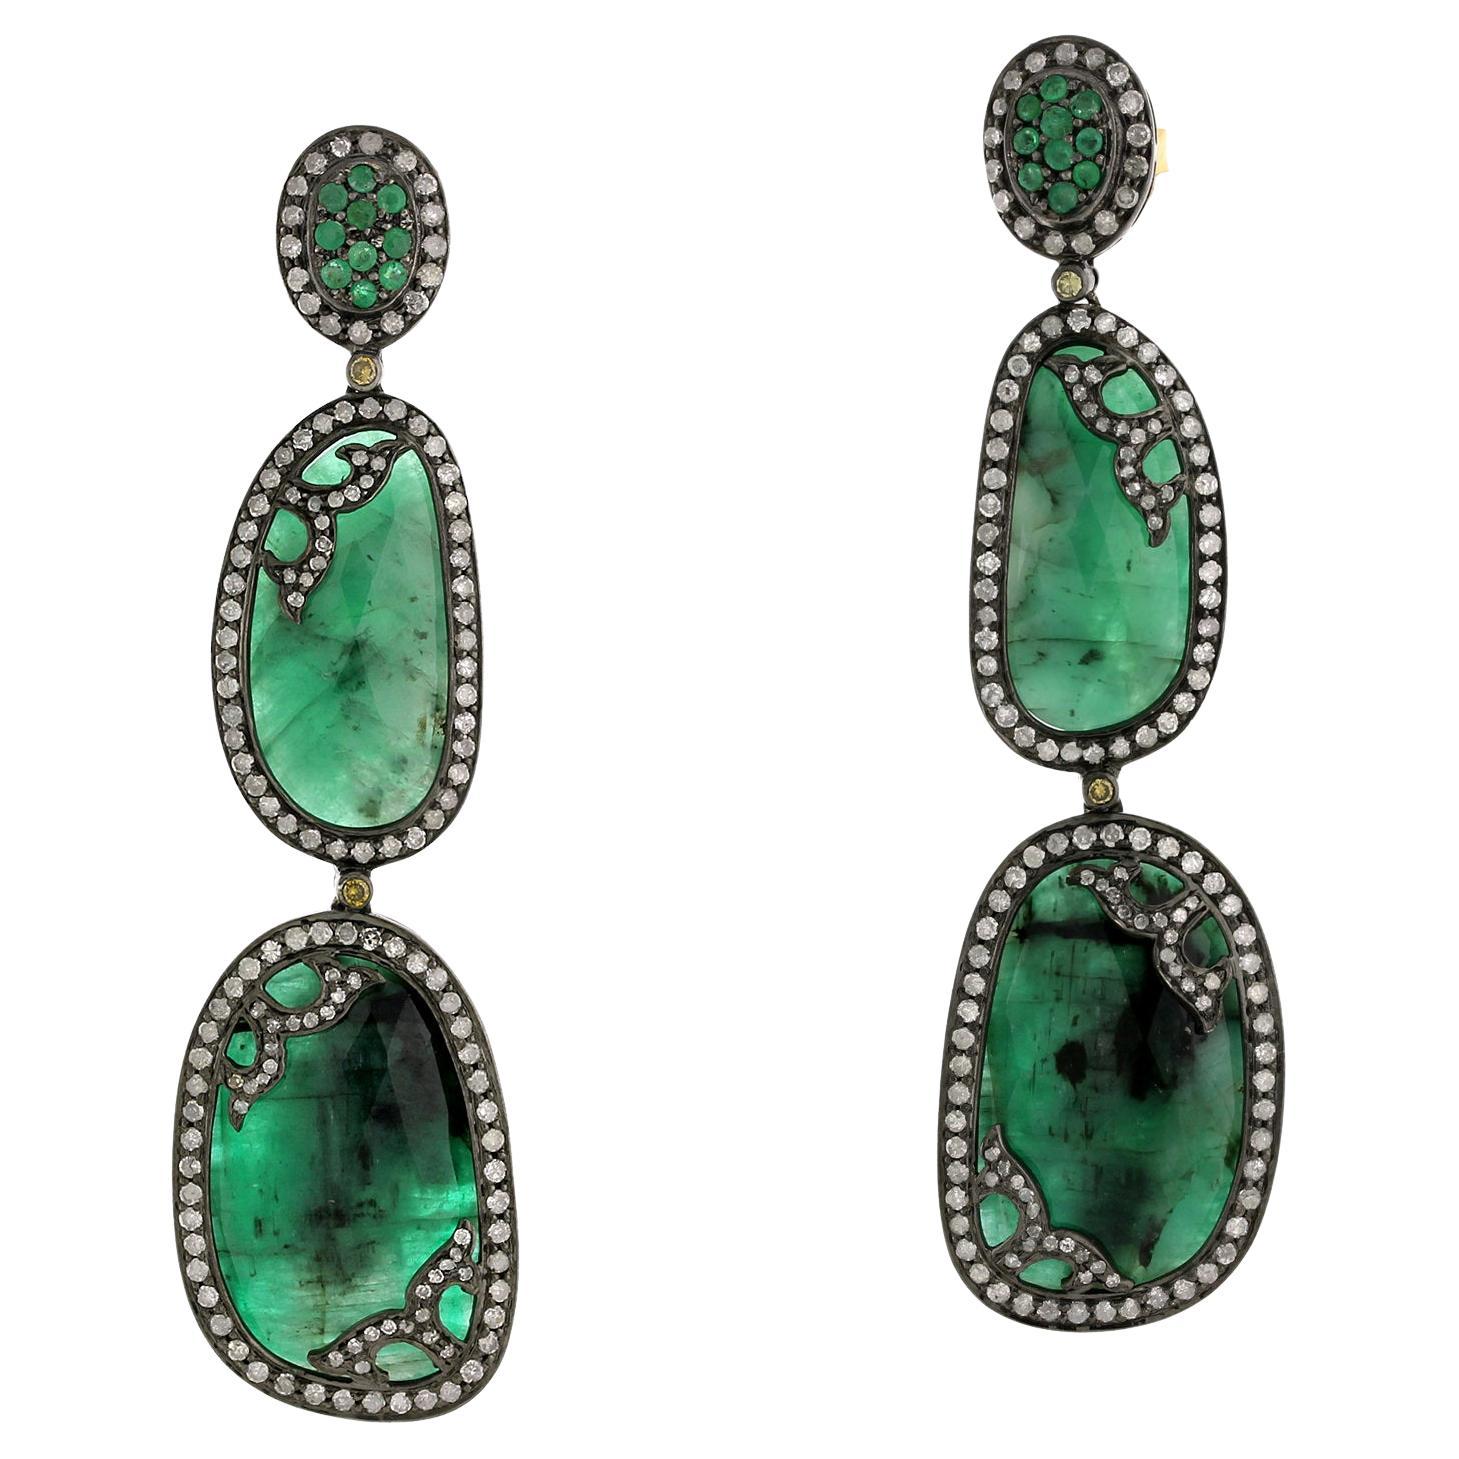 Nugget & Oval Shaped Emerald Earrings with Pave Diamonds in 18k Gold & Silver